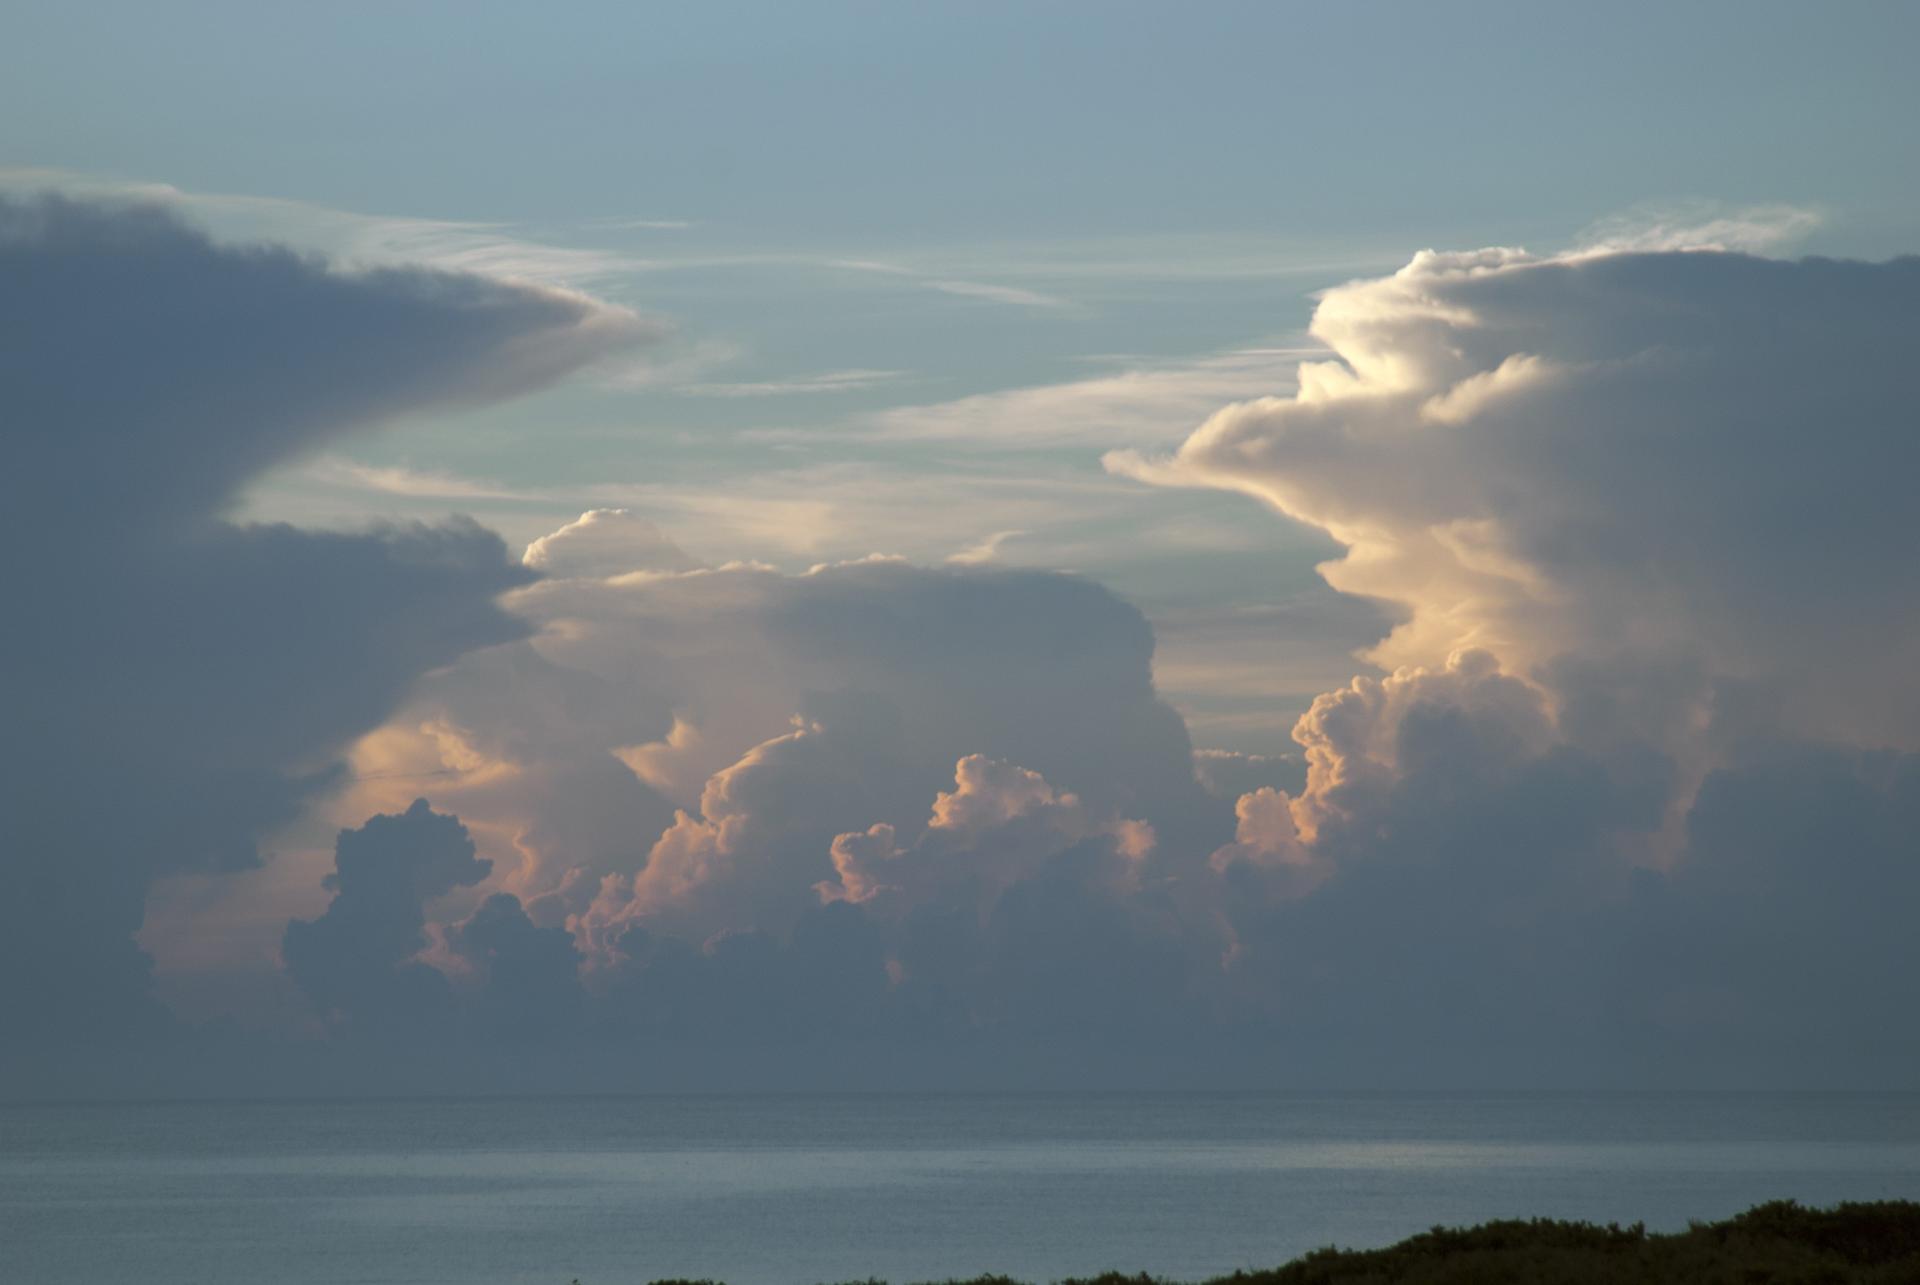 Towering cumulonimbus thunderstorm clouds are seen in this photo taken Aug. 15, 2014, looking east toward the Atlantic Ocean from the Space Launch Complex 37 area at Cape Canaveral Air Force Station (now Cape Canaveral Space Force Station) in Florida.